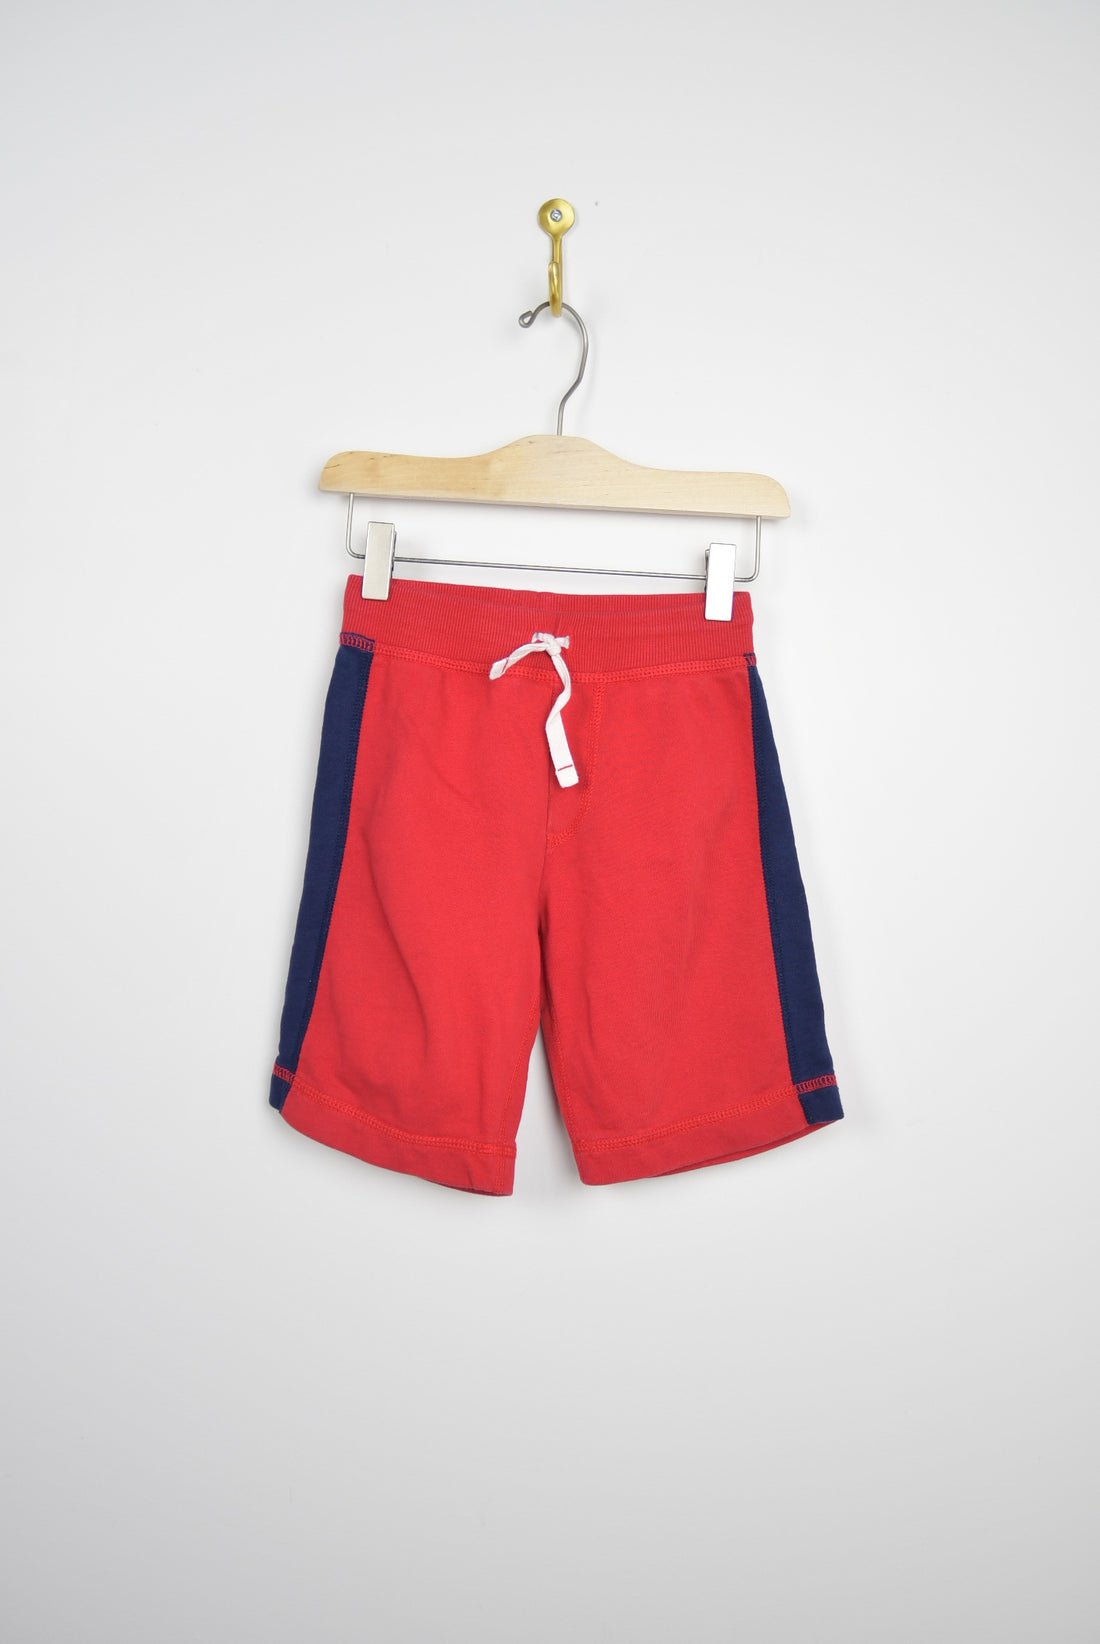 Hanna Andersson Hanna Andersson Sweat Shorts - 5Y